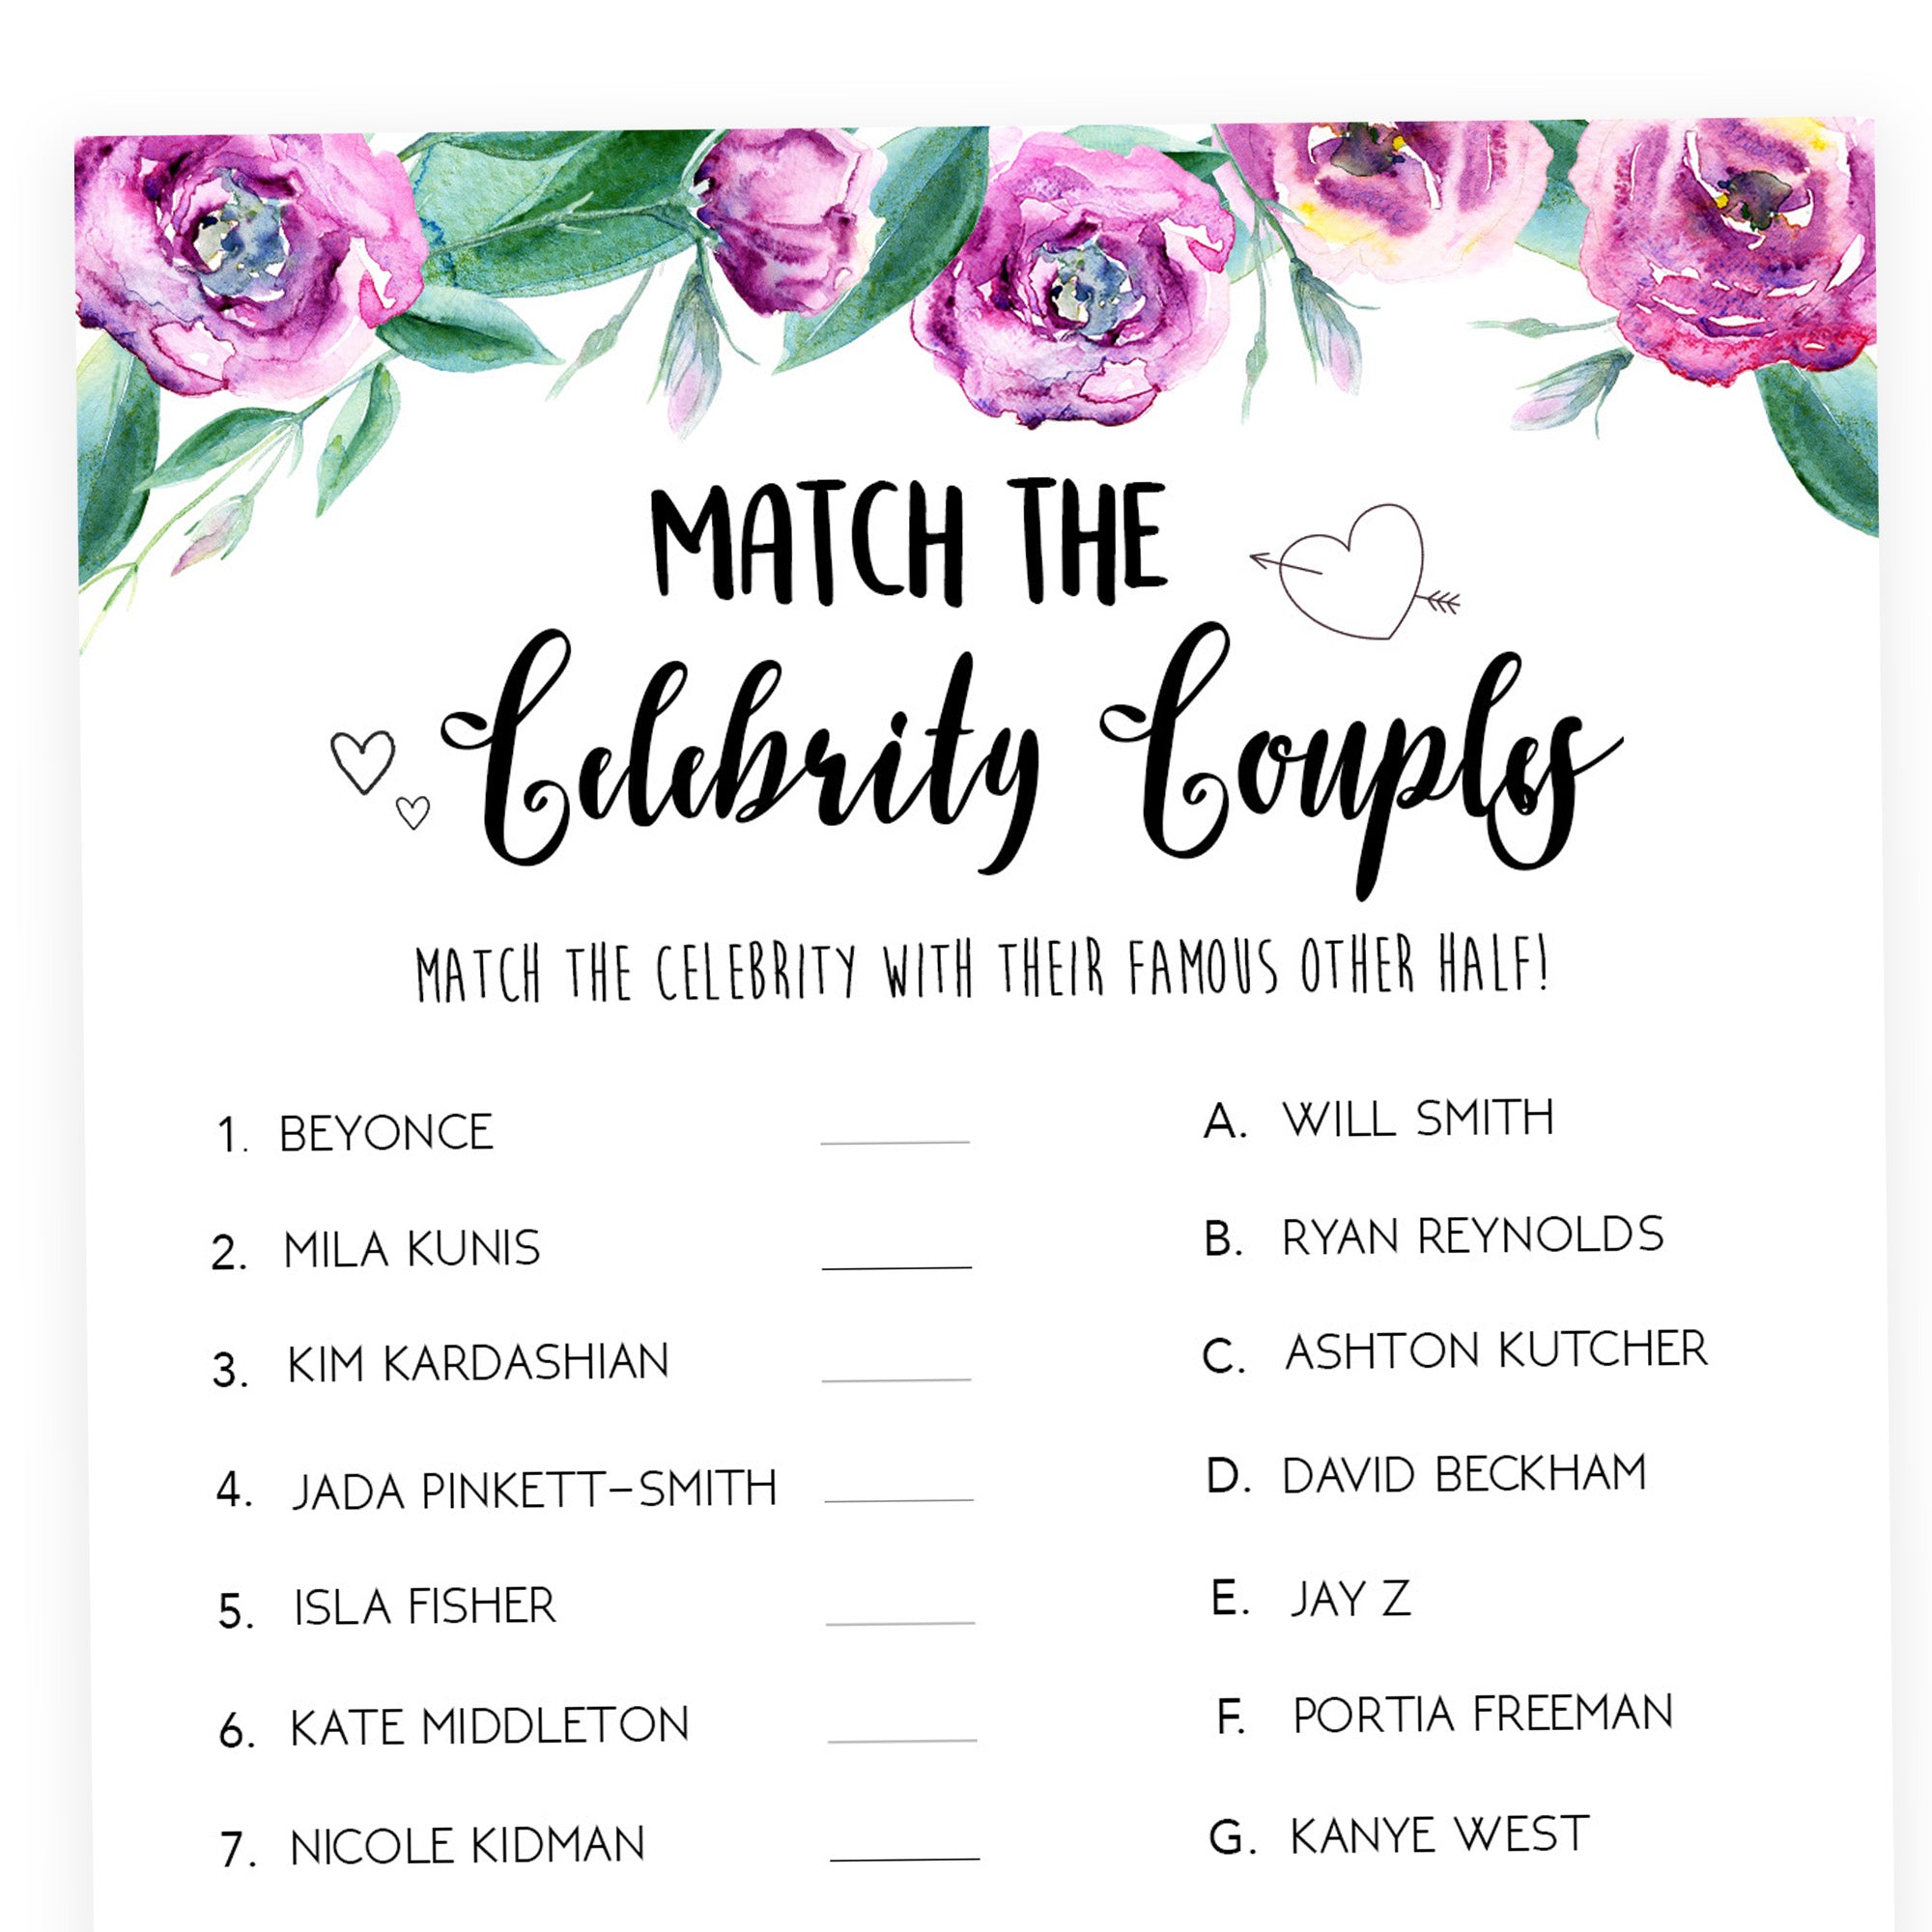 Match Celebrity Couples Game - Purple Peonies